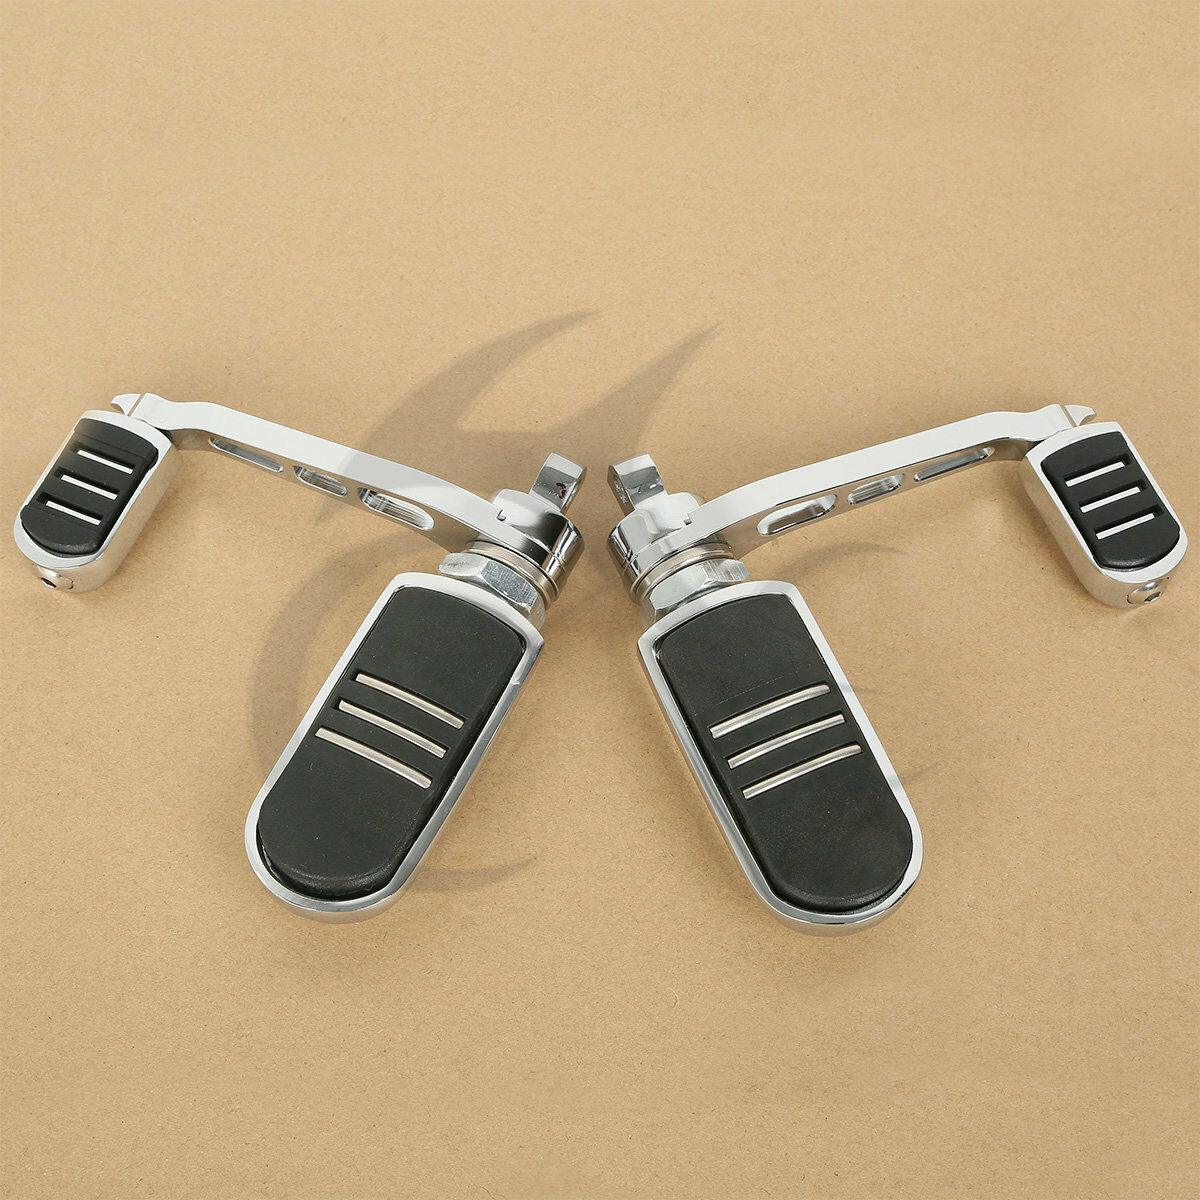 Pair Foot Pegs With Heel Rest Fit For Harley Sportster XL 883 1200 Iron Softail - Moto Life Products